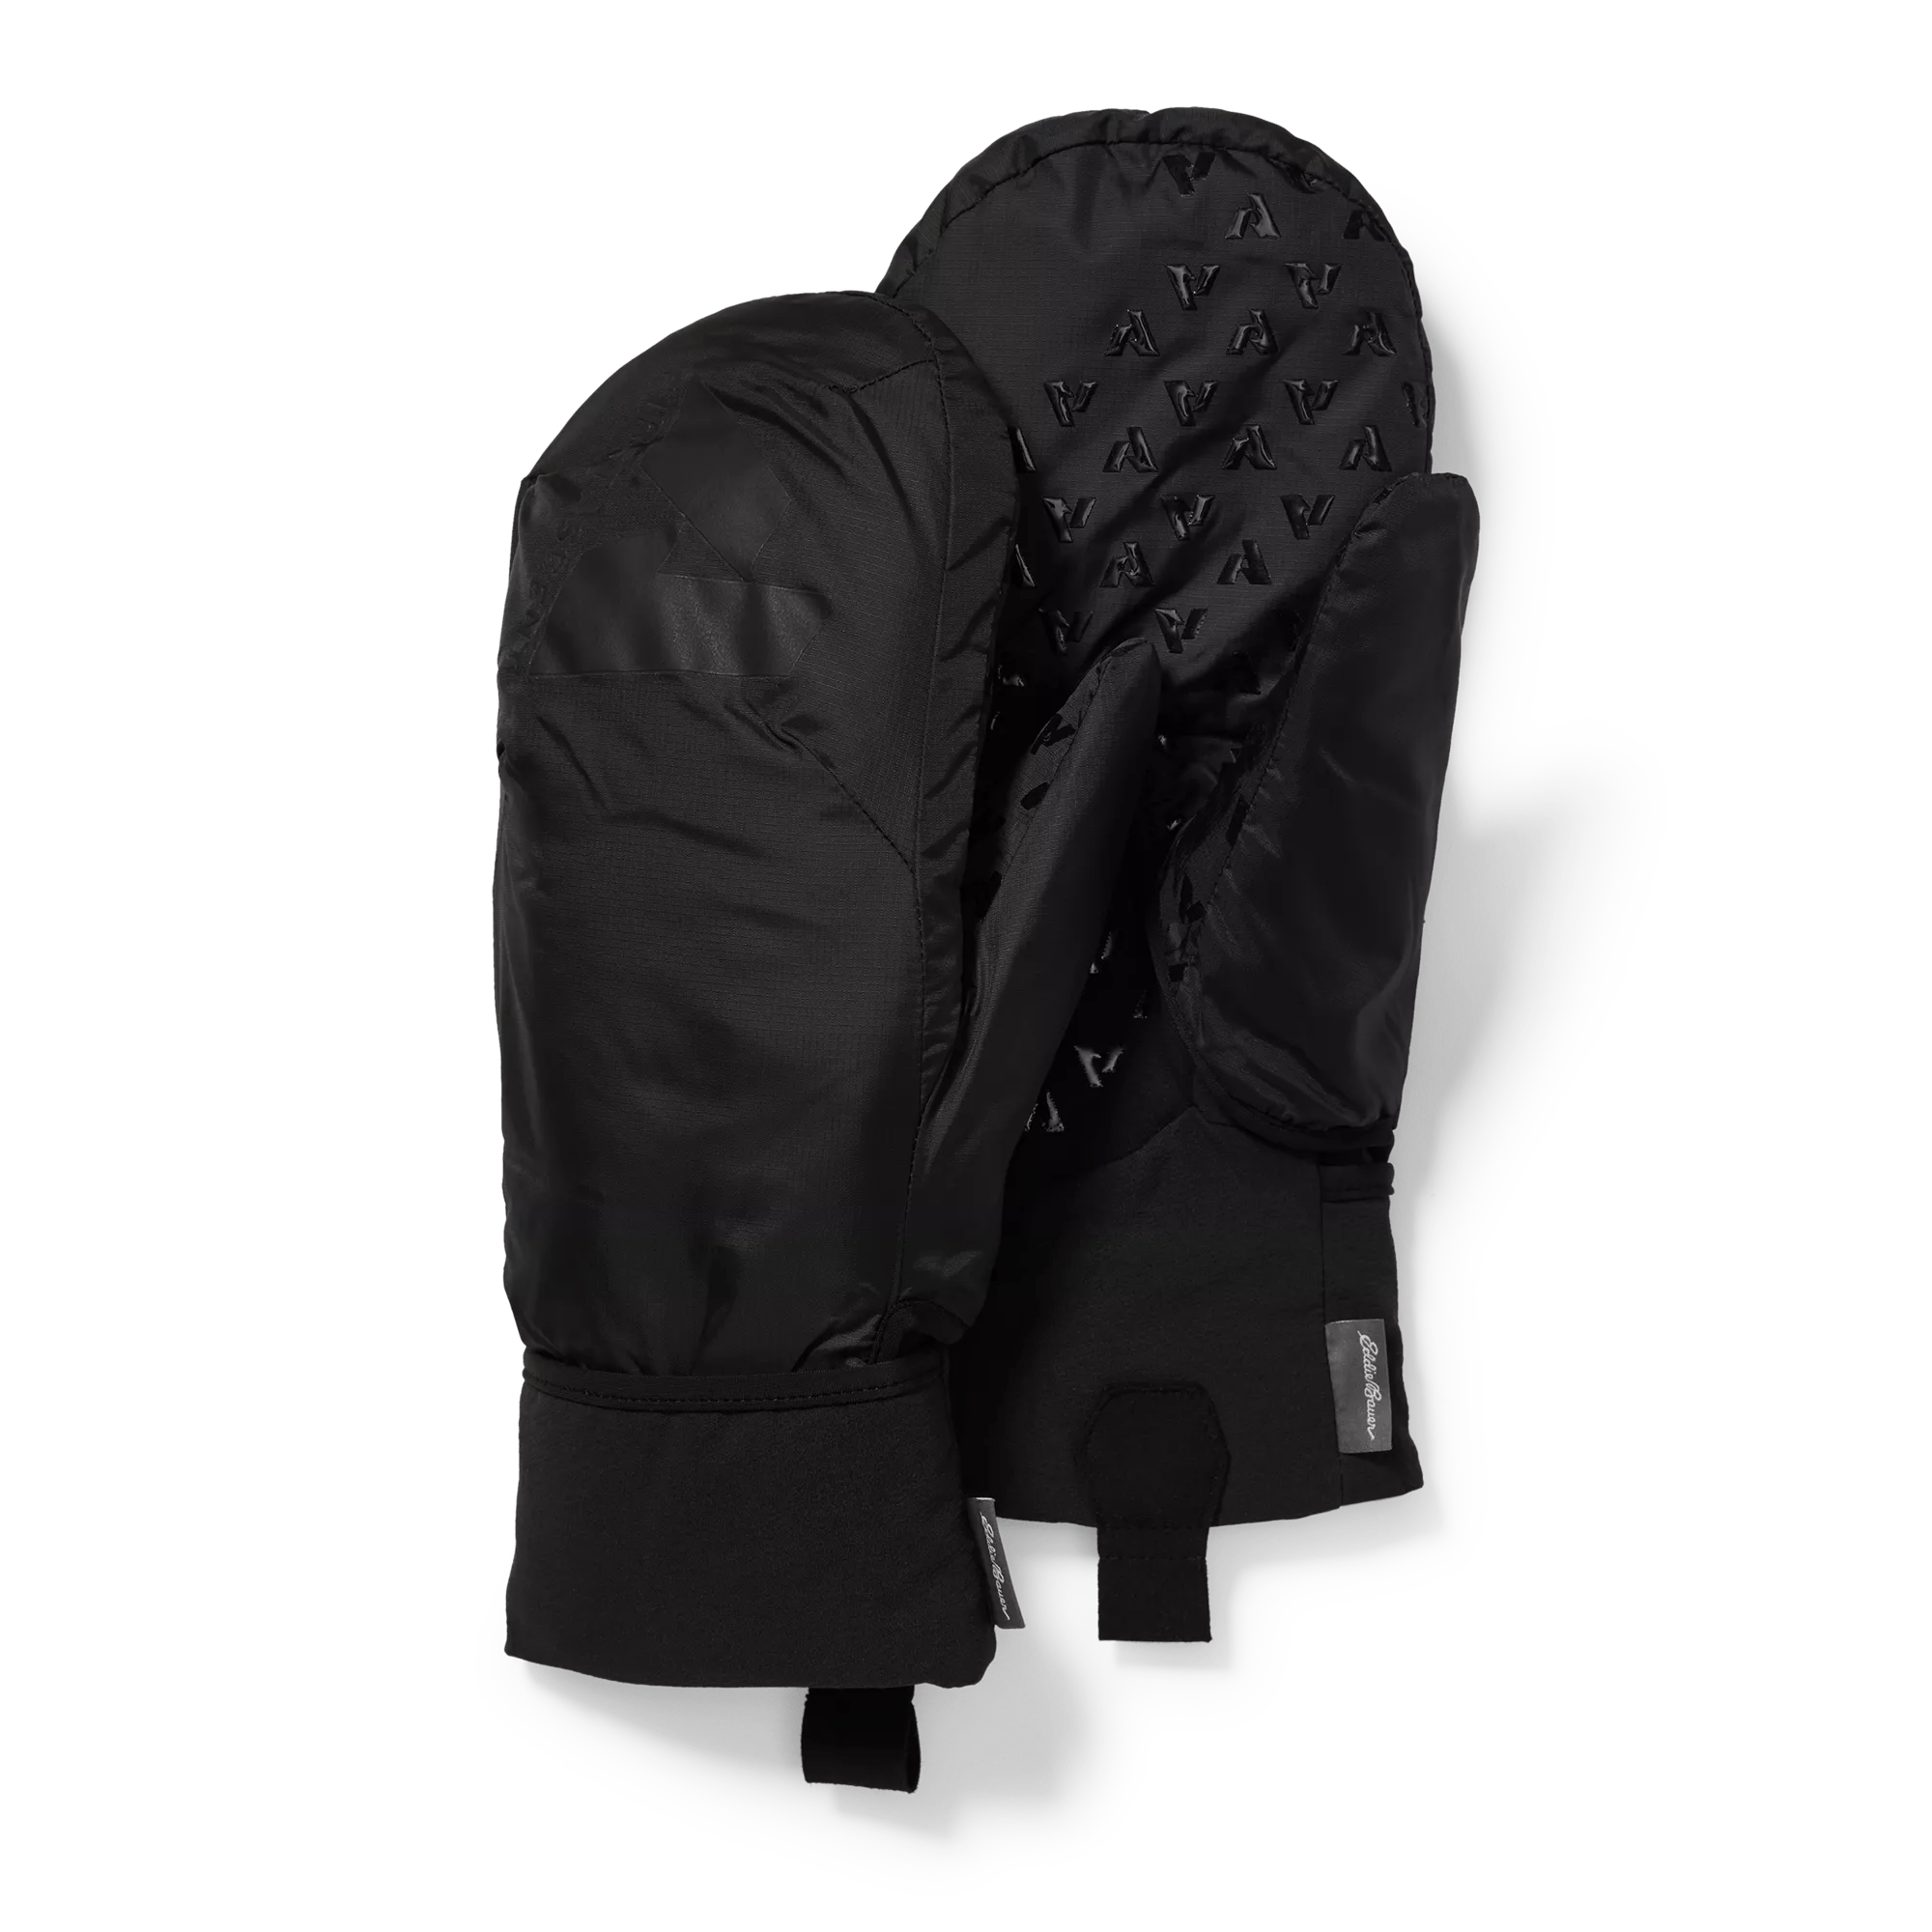 Guide Pro Adaptor Gloves